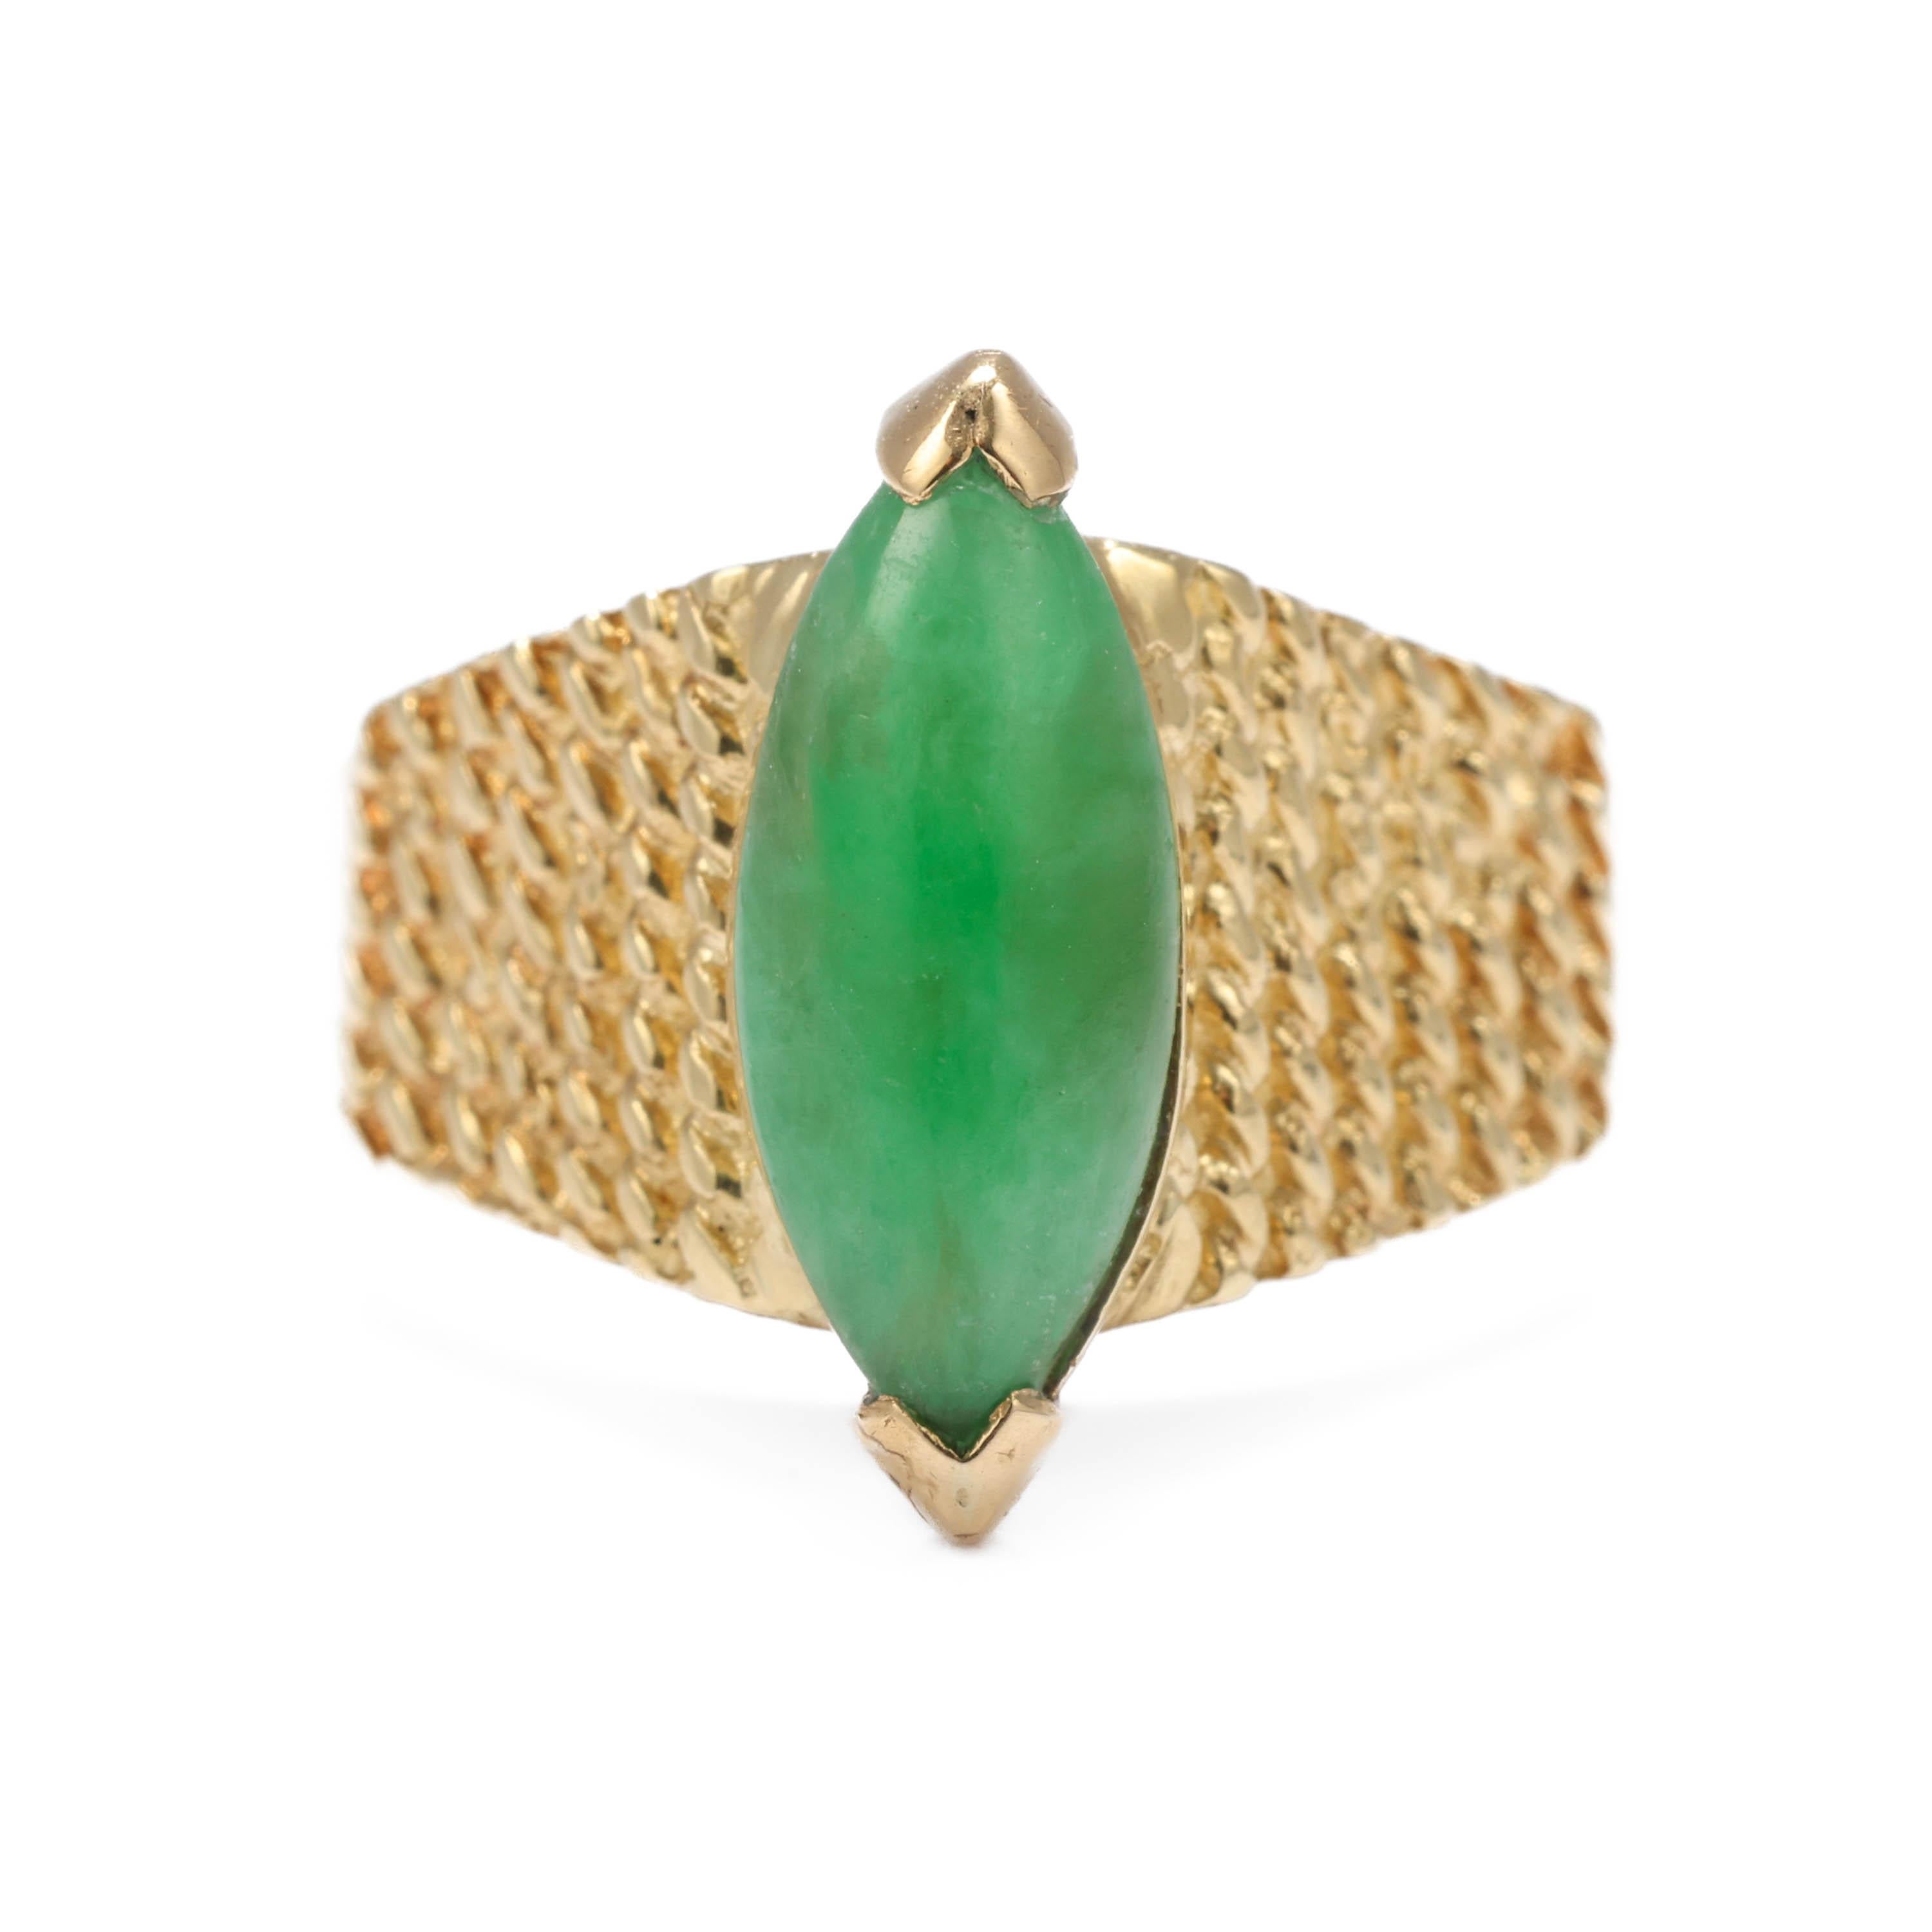 A gorgeous -and oh so rare- original Midcentury (circa 1950s-1960s) Tiffany & Co. Burmese jadeite jade and 18K yellow gold ring. Featuring a bright apple green navette shaped cabochon of natural and untreated Burmese jadeite jade with an old-school